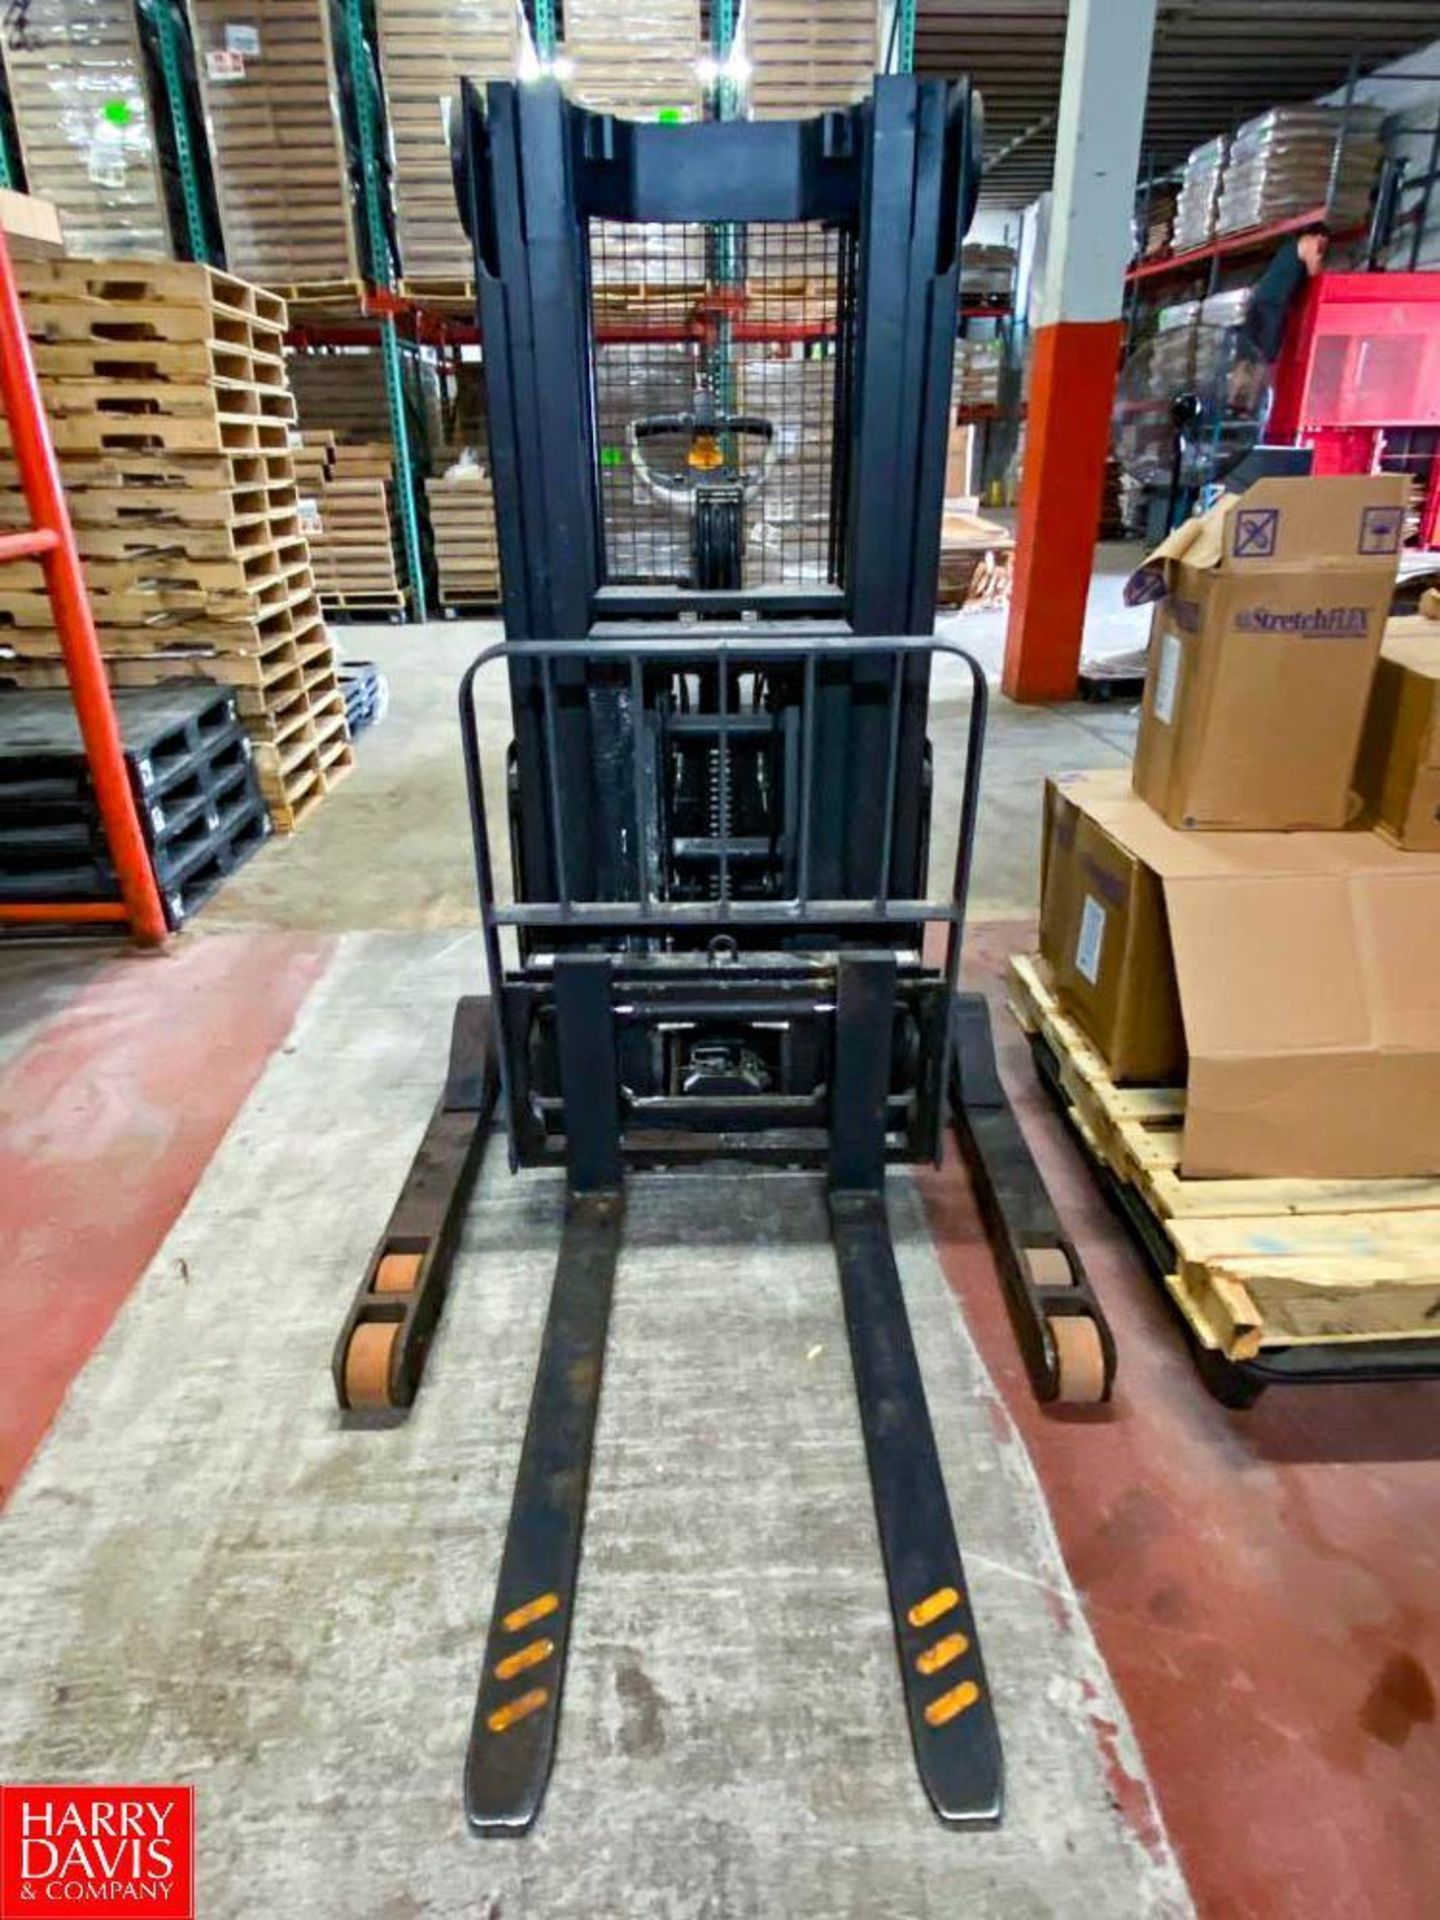 Crown 2,700 LB Capacity Stand-Up Electric Forklift with Side Shift Type, 5500 Series , S/N 10203824 - Image 2 of 2